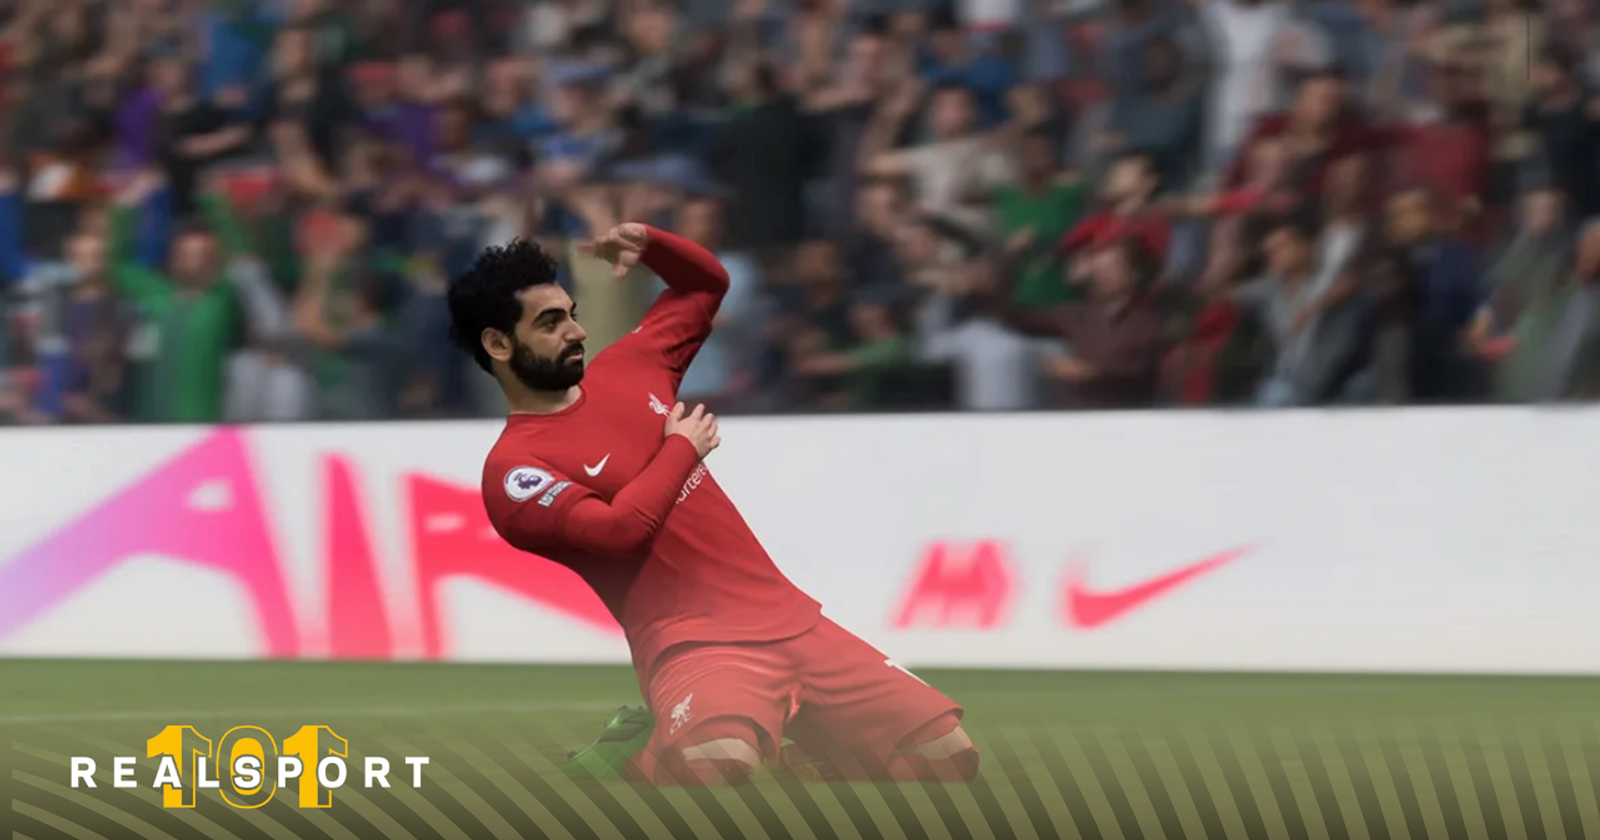 Prime Gaming February FIFA 23 pack features Mo Salah for the